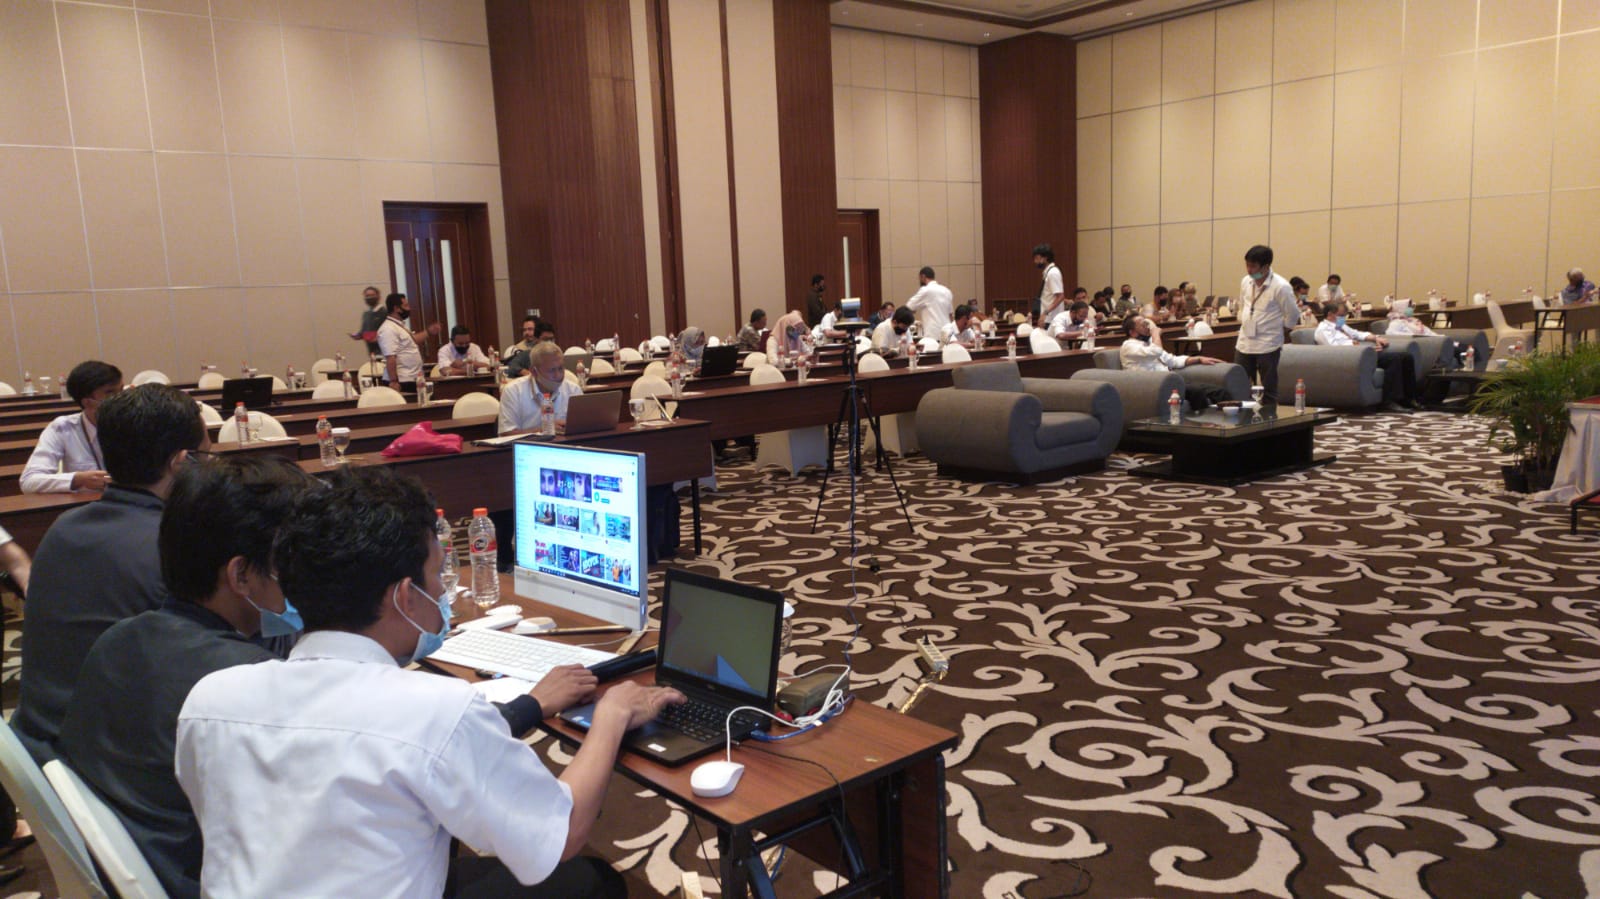 Atria Hotel Gading Serpong video conference